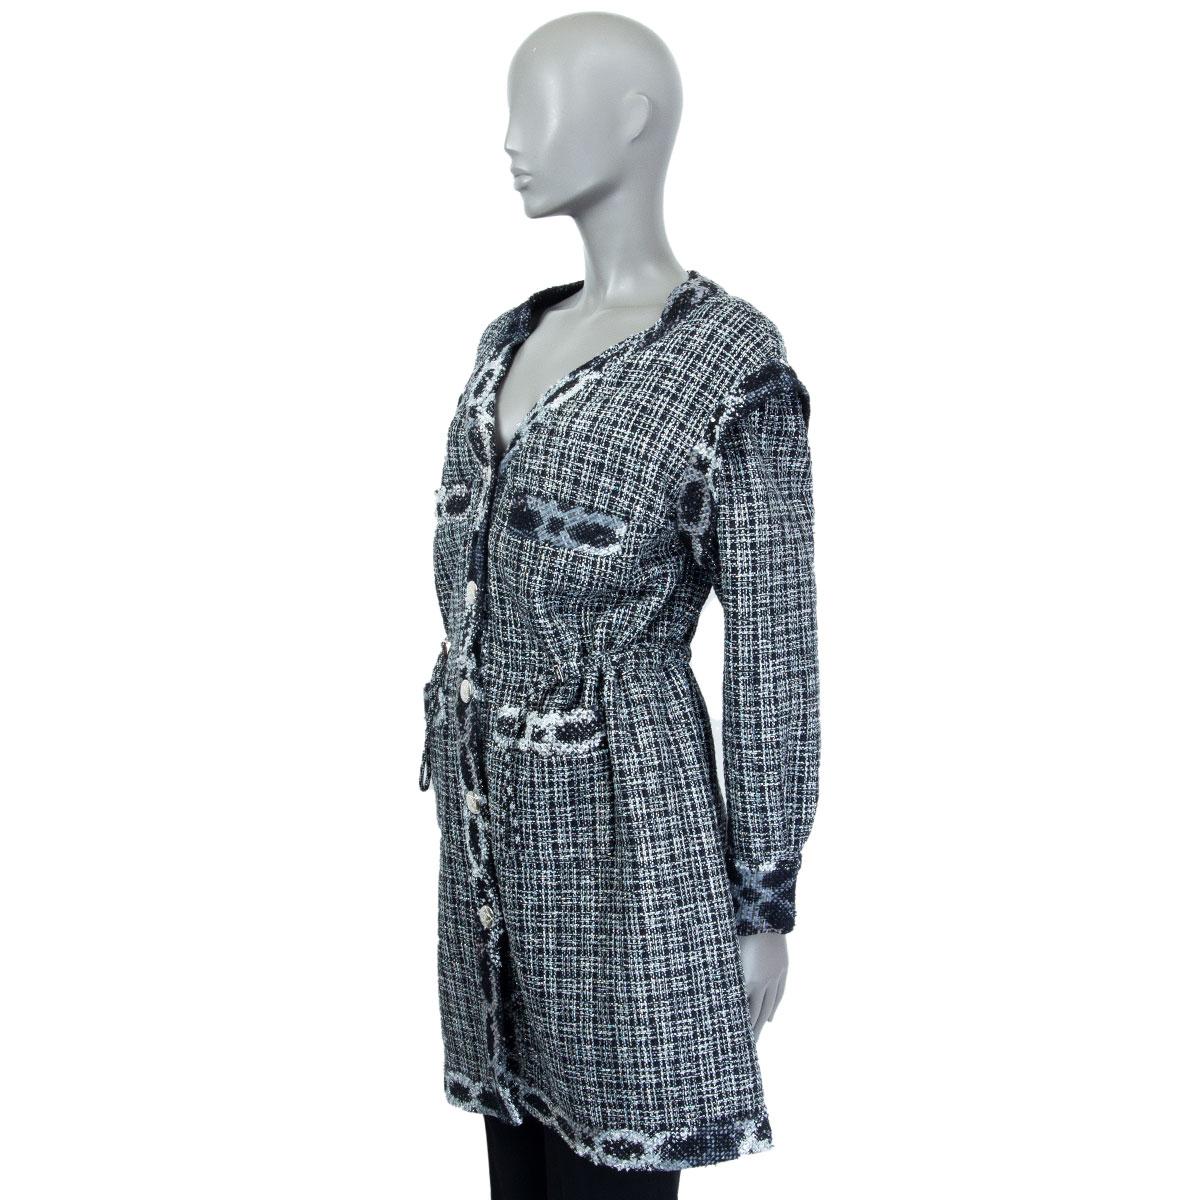 authentic Chanel v-neck tweed coat in black, dark blue, grey, silver, and metallic cotton (51%), acetate (34%), polyamide (10%) and polyethylene (5%). Lined in black silk (100%).  Opens with 6 buttons on the front and has 2 chest-pockets and